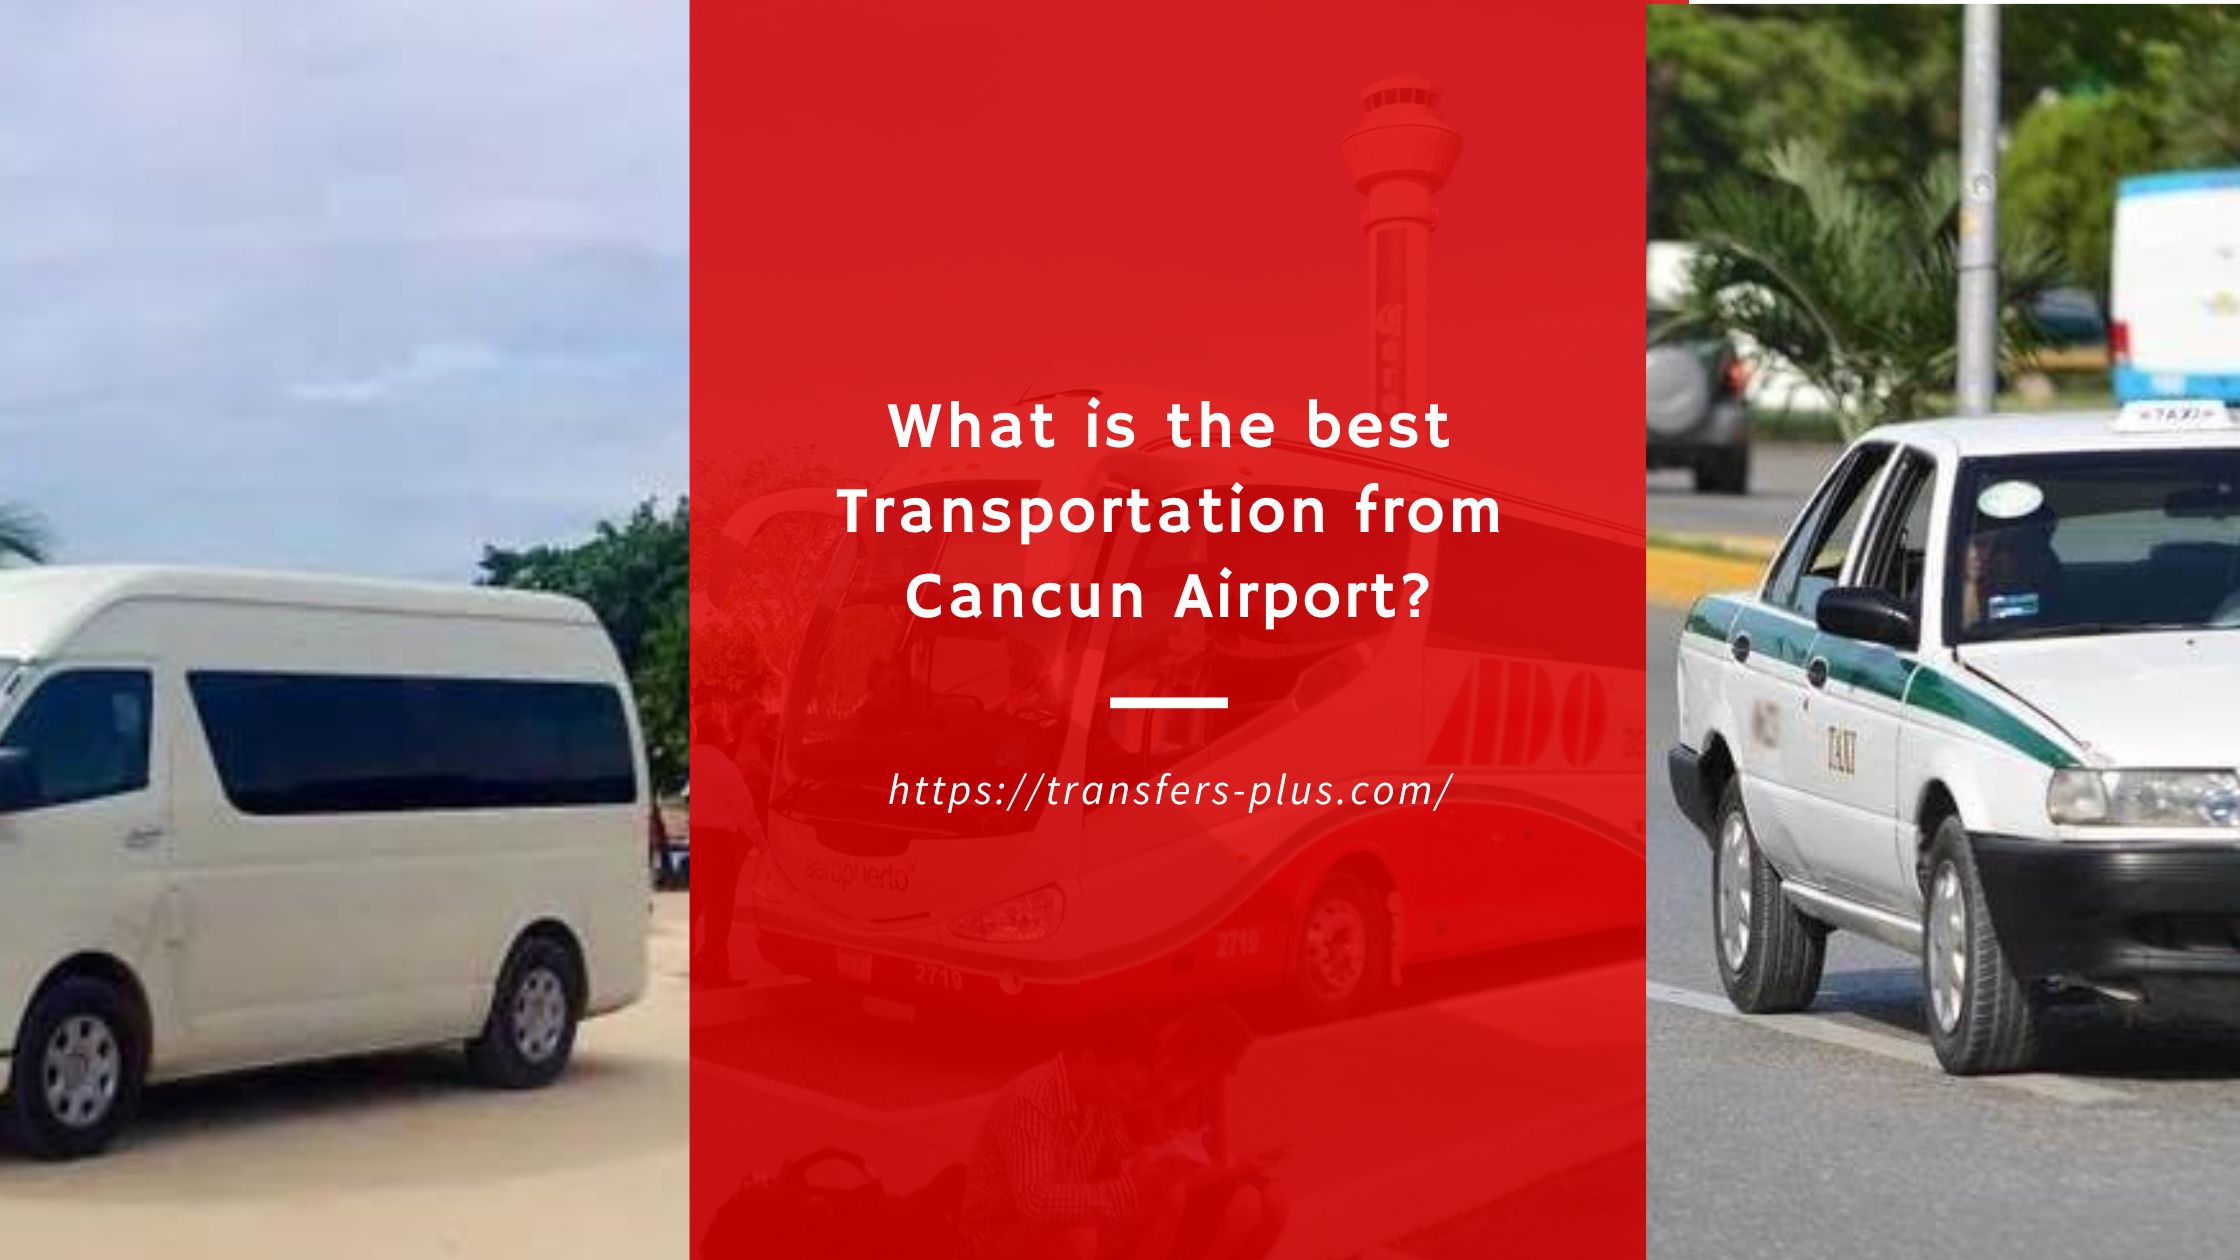 What is the best Transportation from Cancun Airport